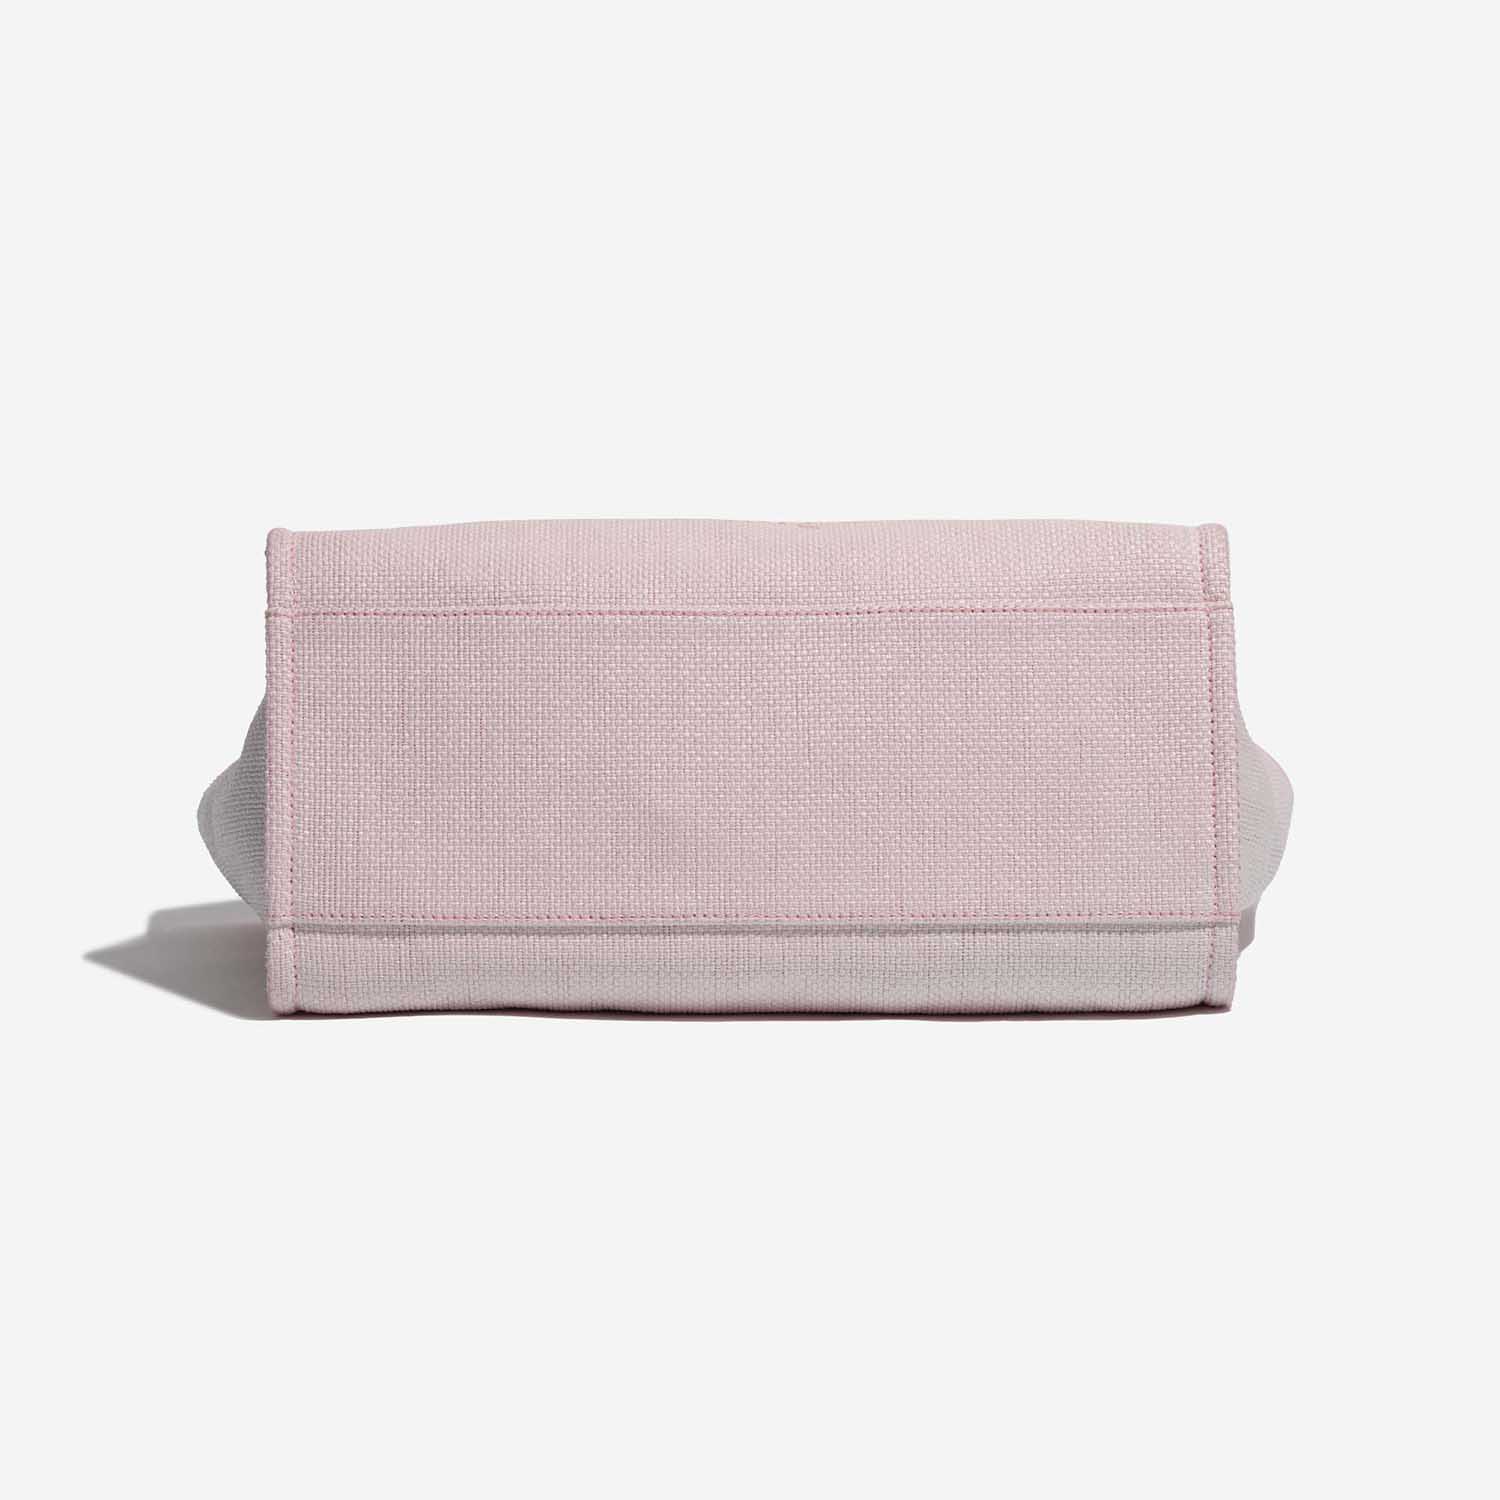 Pre-owned Chanel bag Deauville Medium Canvas Pink Pink Bottom | Sell your designer bag on Saclab.com